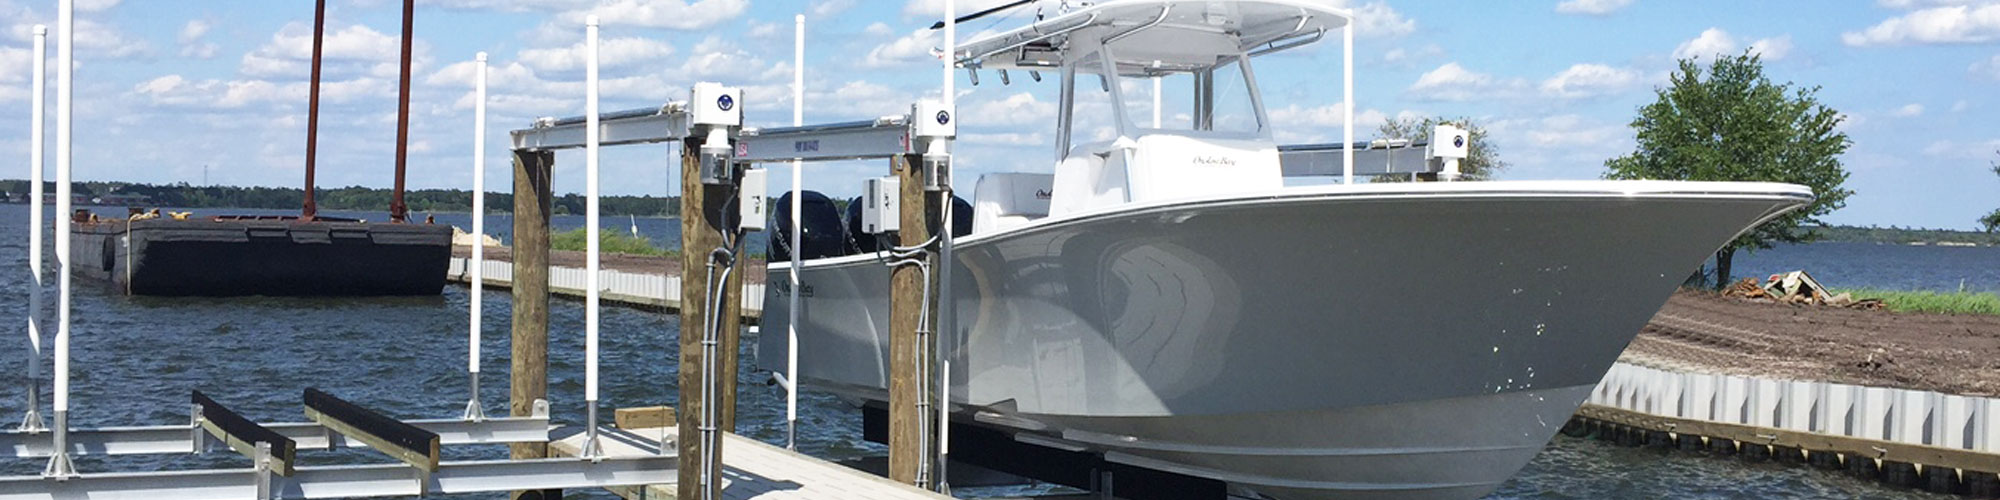 Premiere Boat Slip Rental with Dedicated Lifts in Sneads Ferry